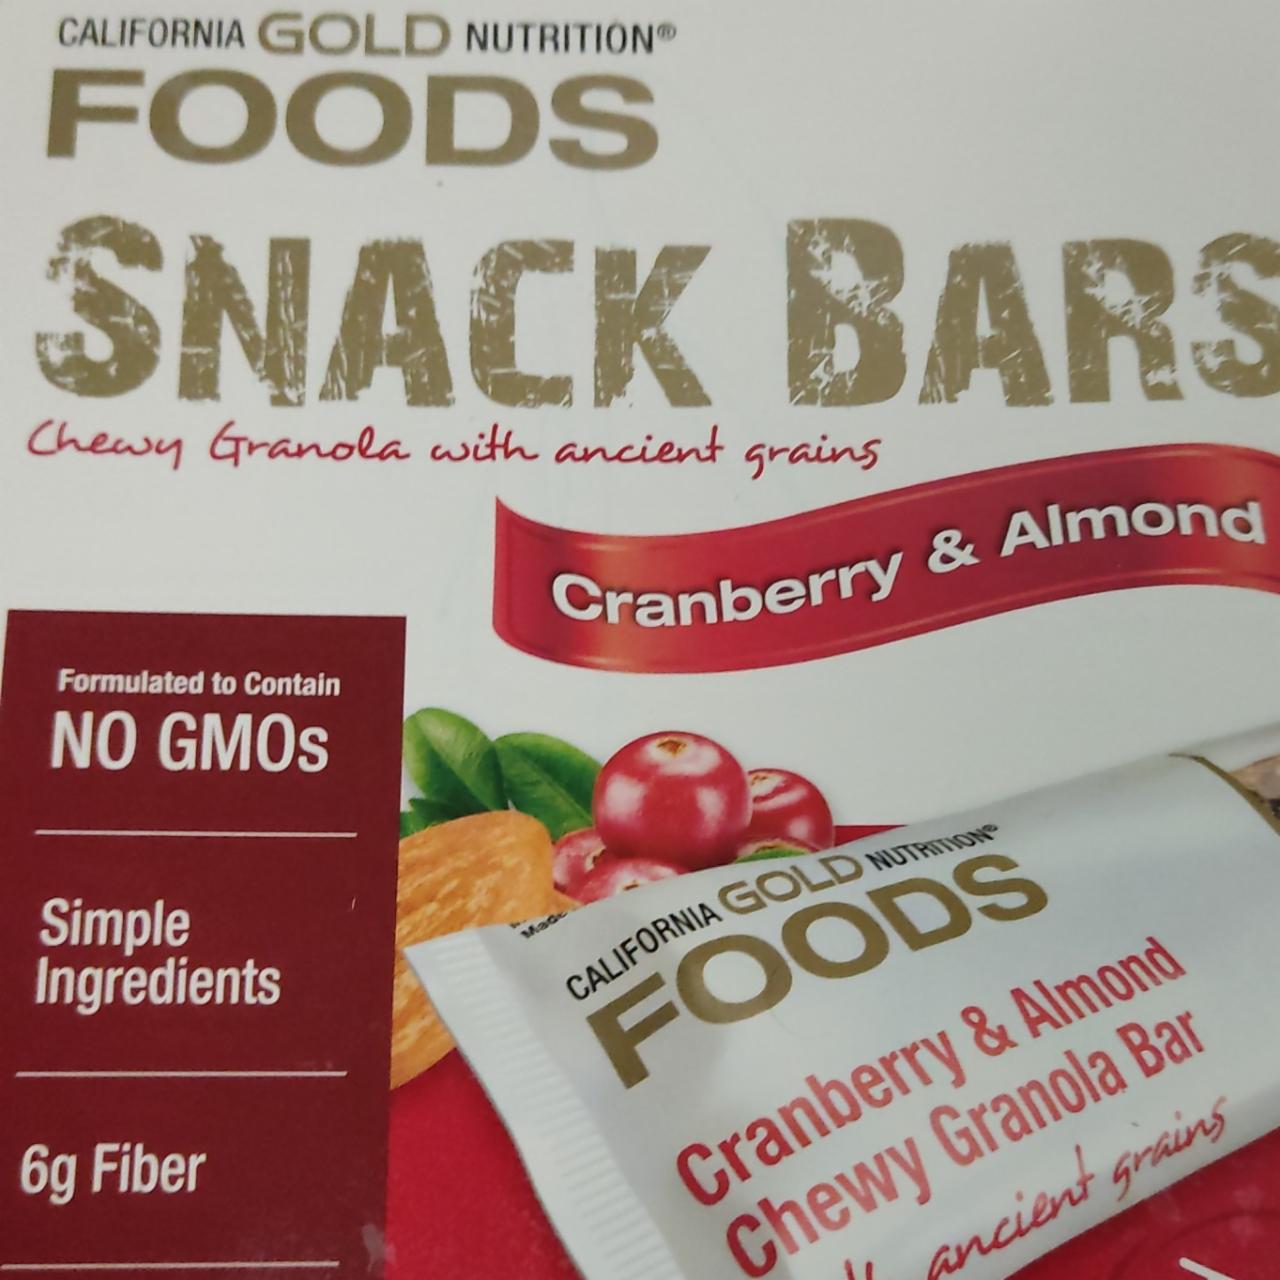 Фото - Foods snack bars cranberry almond California gold nutrition